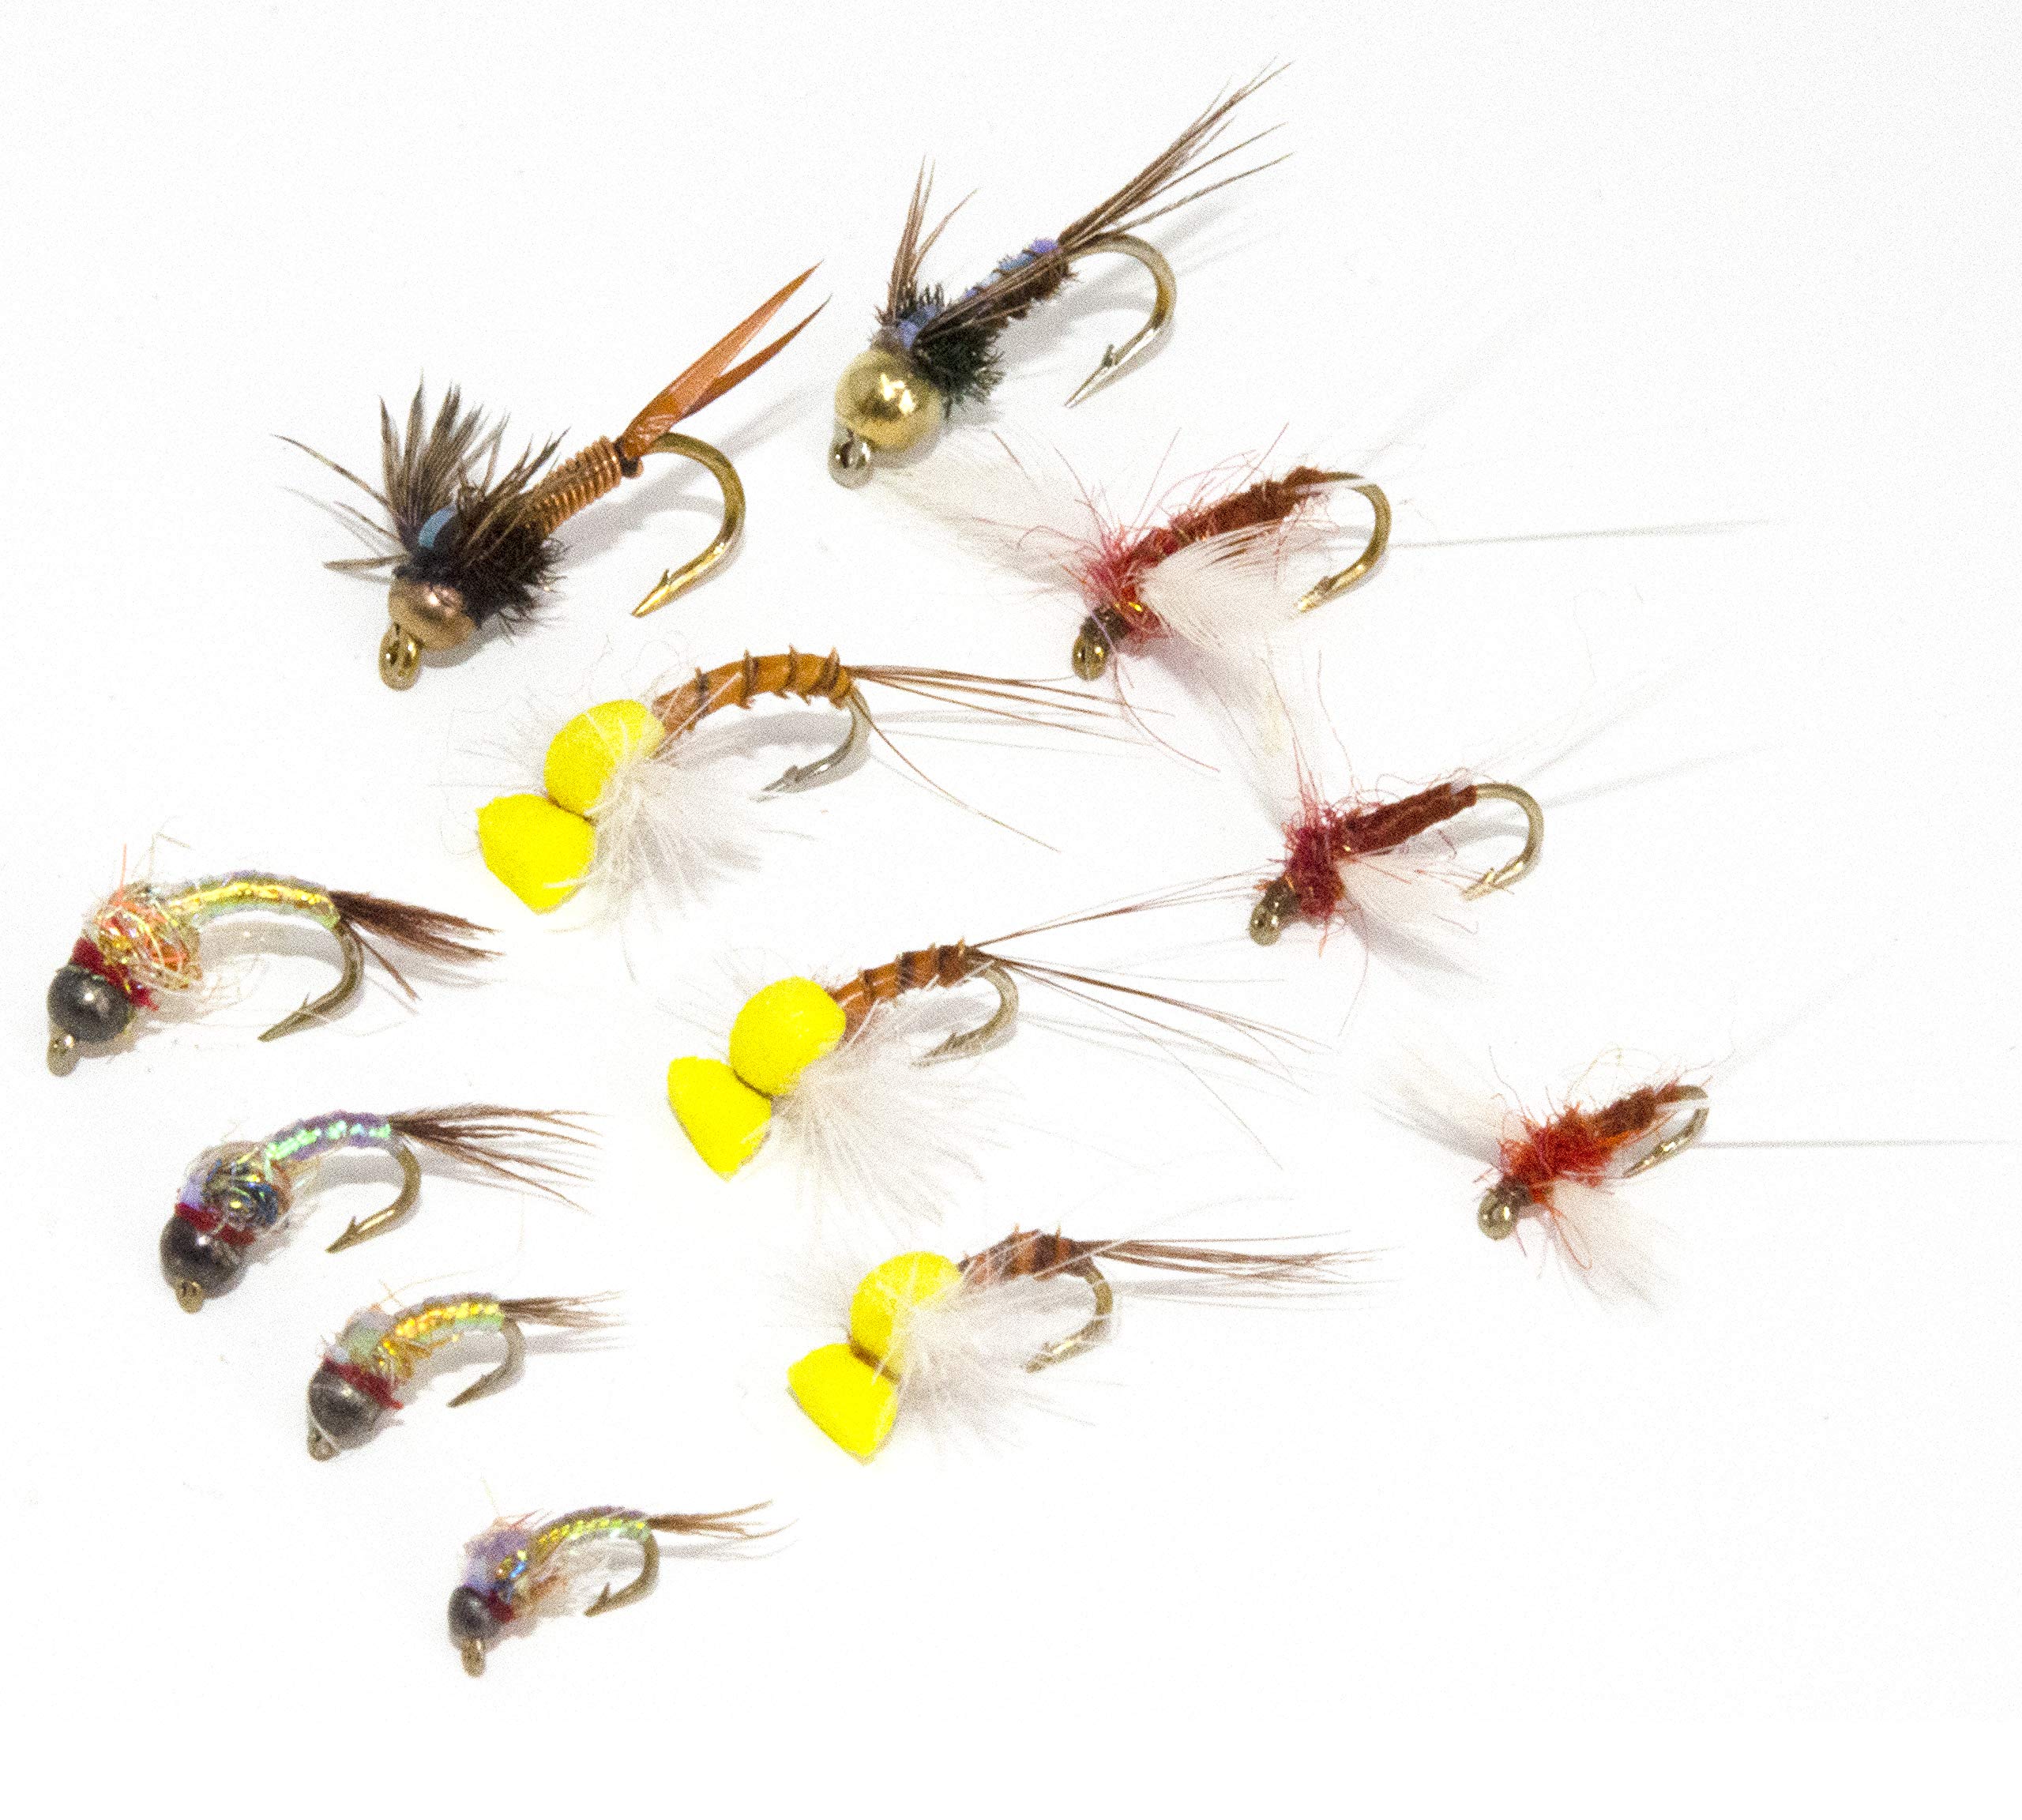 12 Favorite Fly Fishing Flies Assortment, Dry, Wet, Nymphs, Streamers,  Wooly Buggers, Caddis